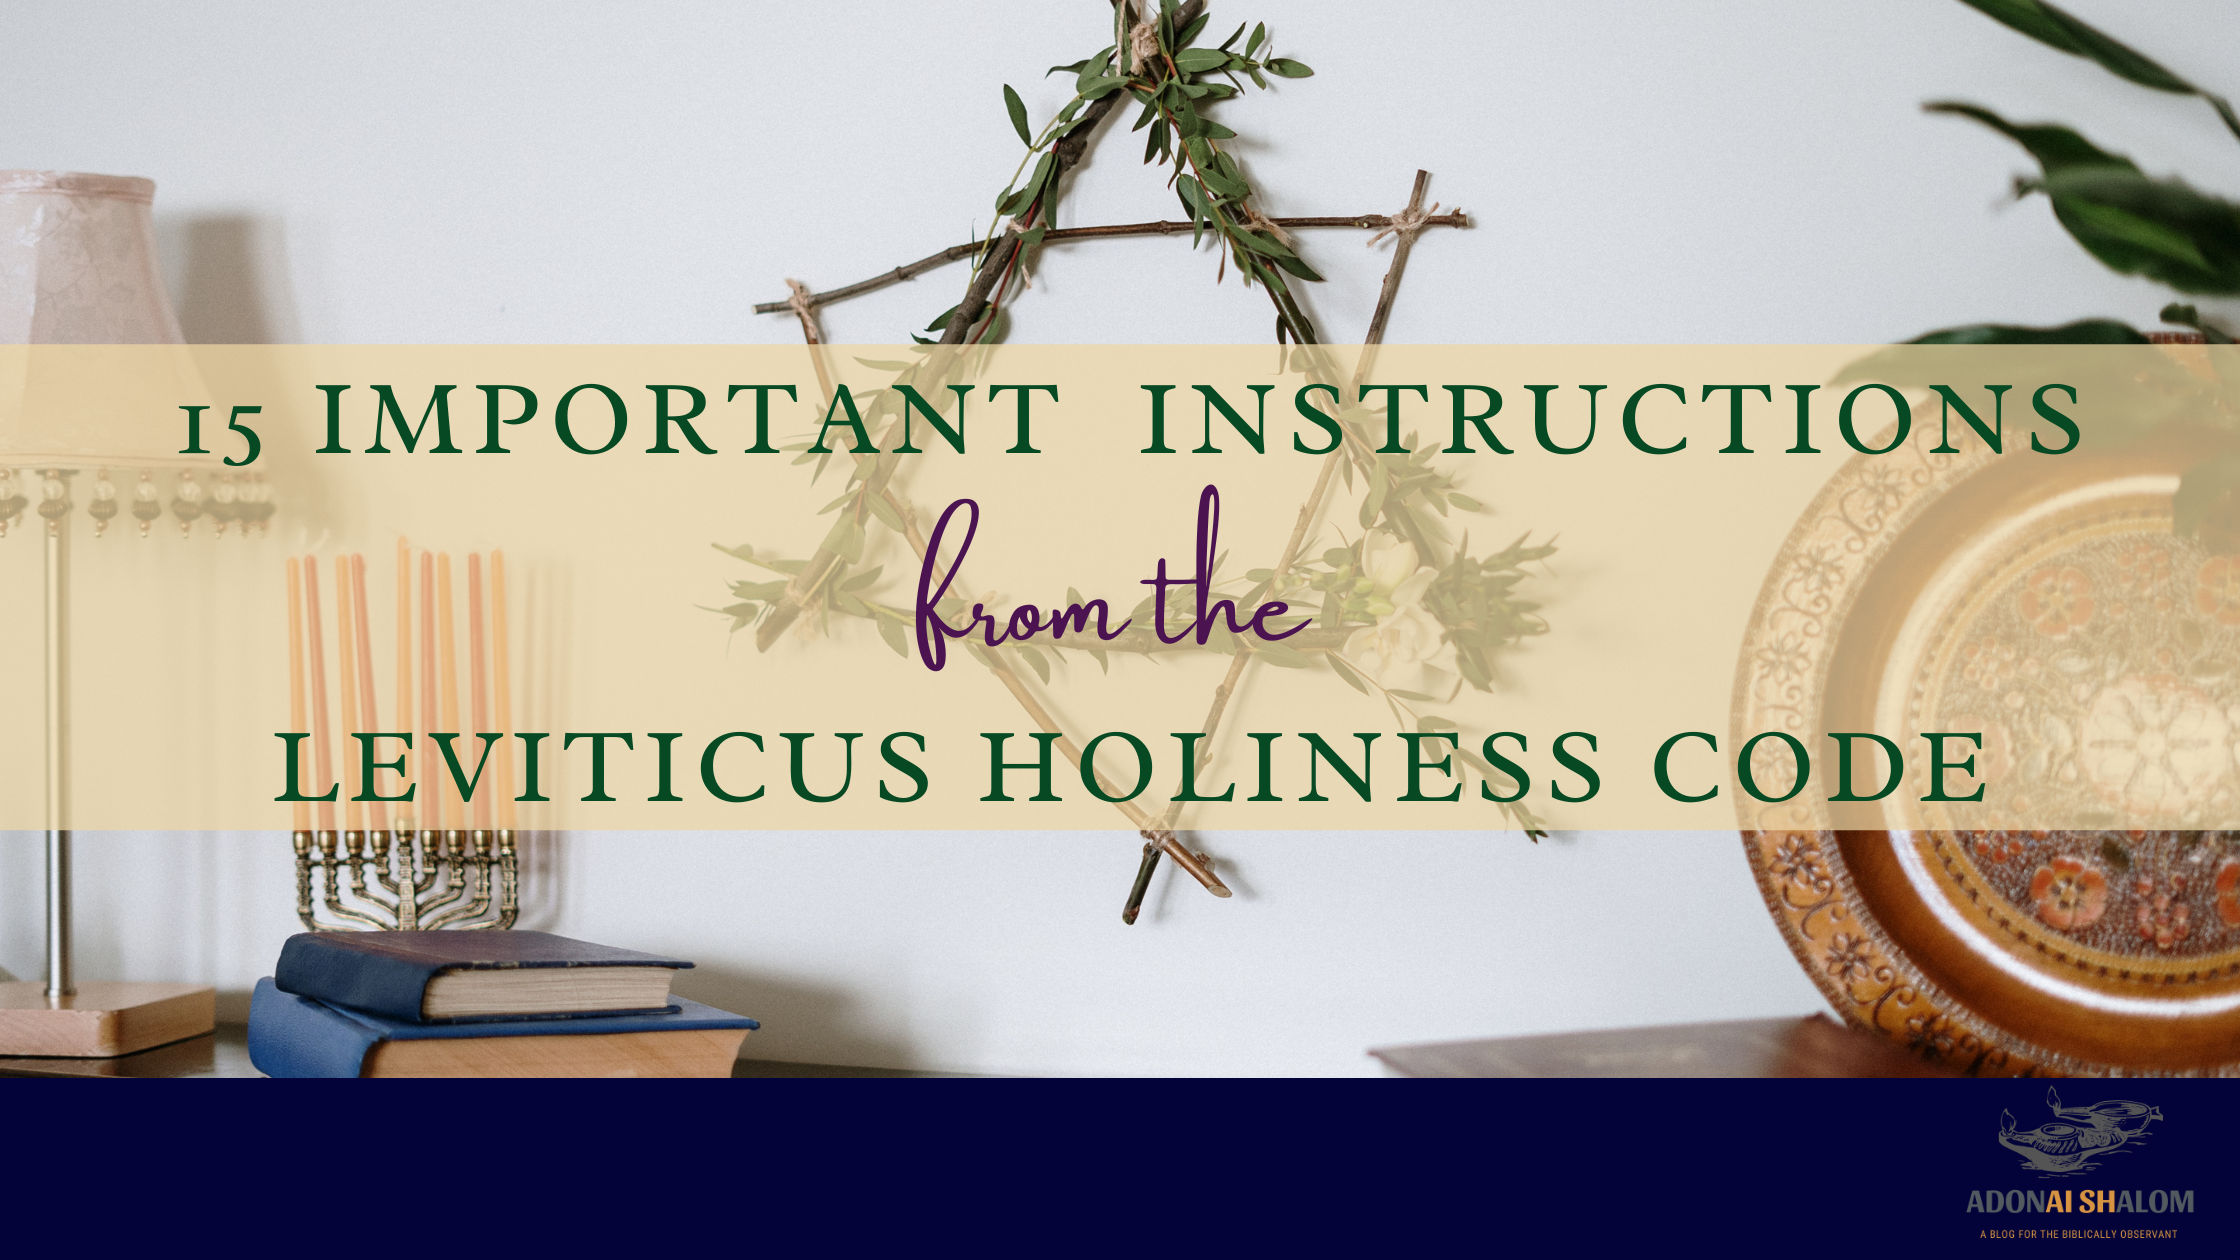 15 Important Instructions from the Leviticus Holiness Code